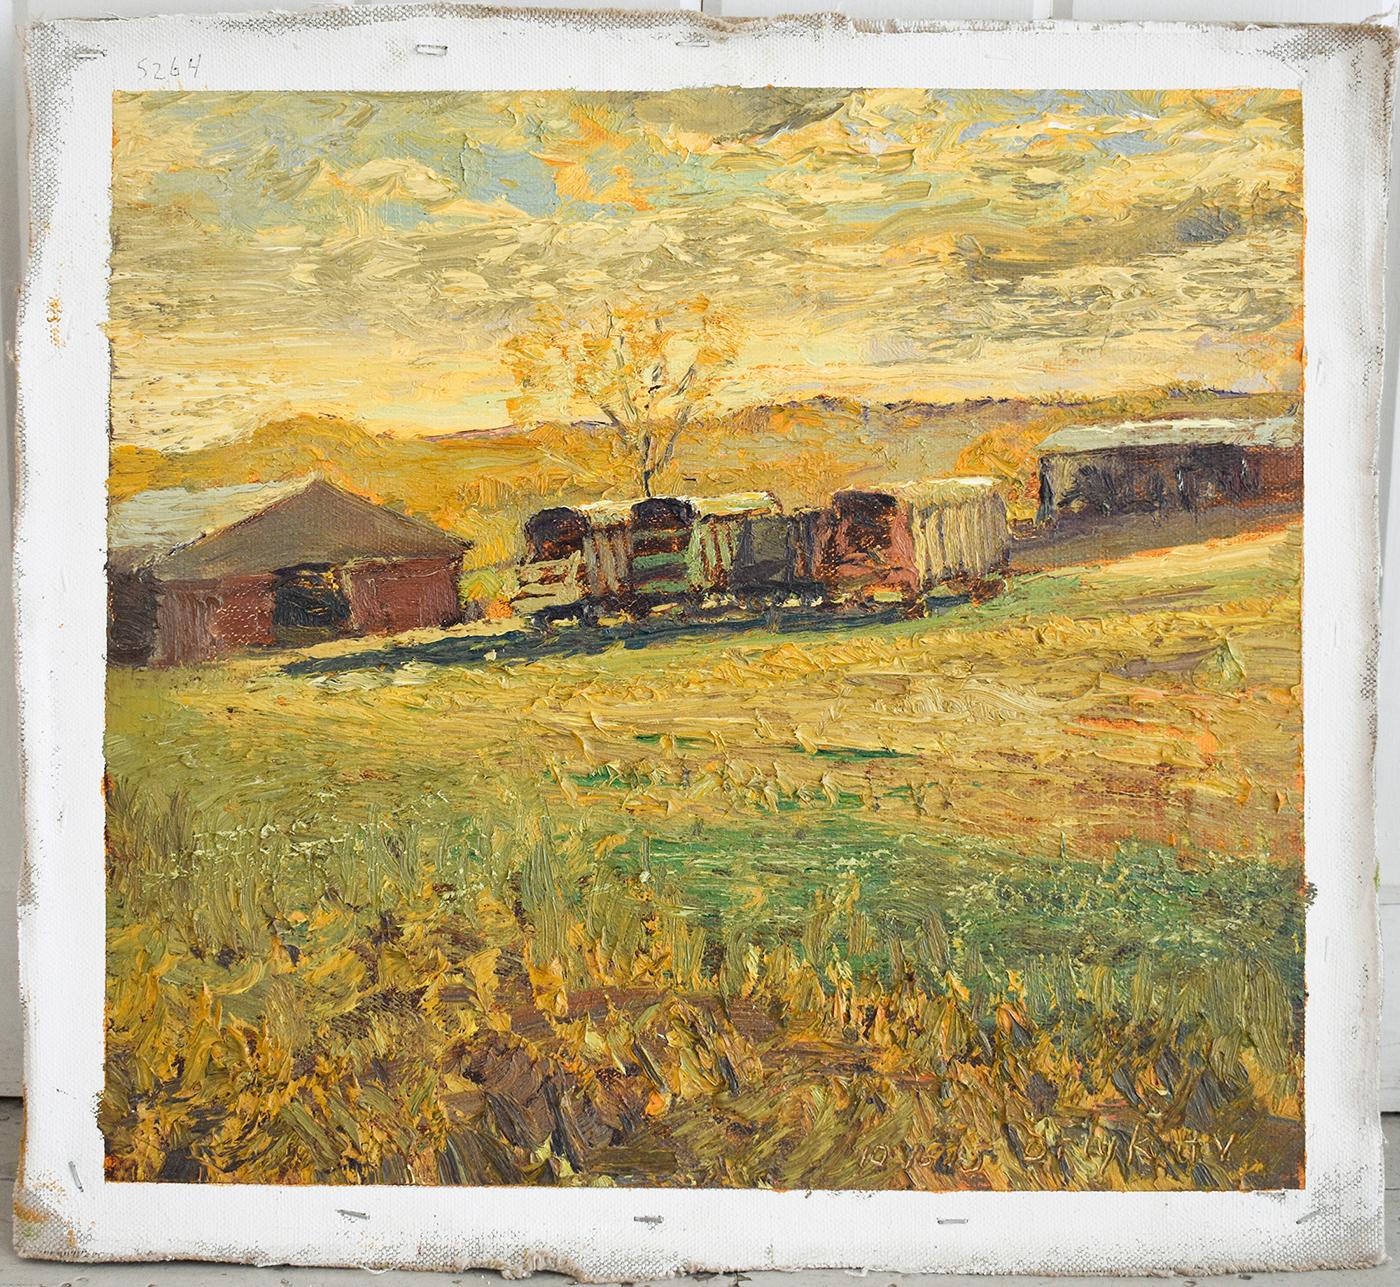 #5264 Wilber McIntyre's Wagons: Impressionist En Plein Air Landscape on Linen - Painting by Harry Orlyk